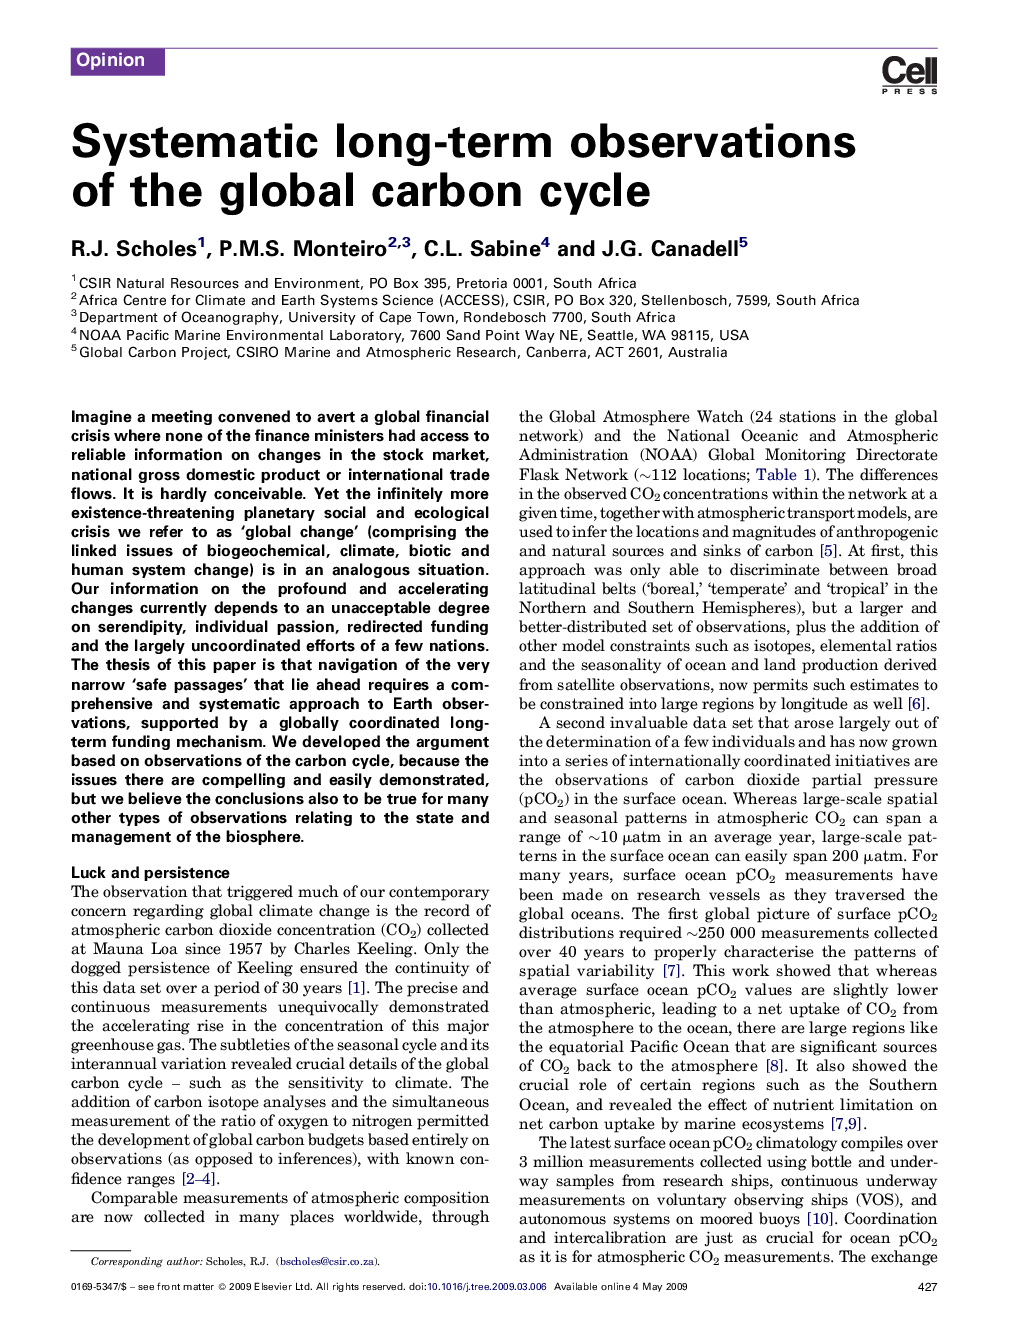 Systematic long-term observations of the global carbon cycle